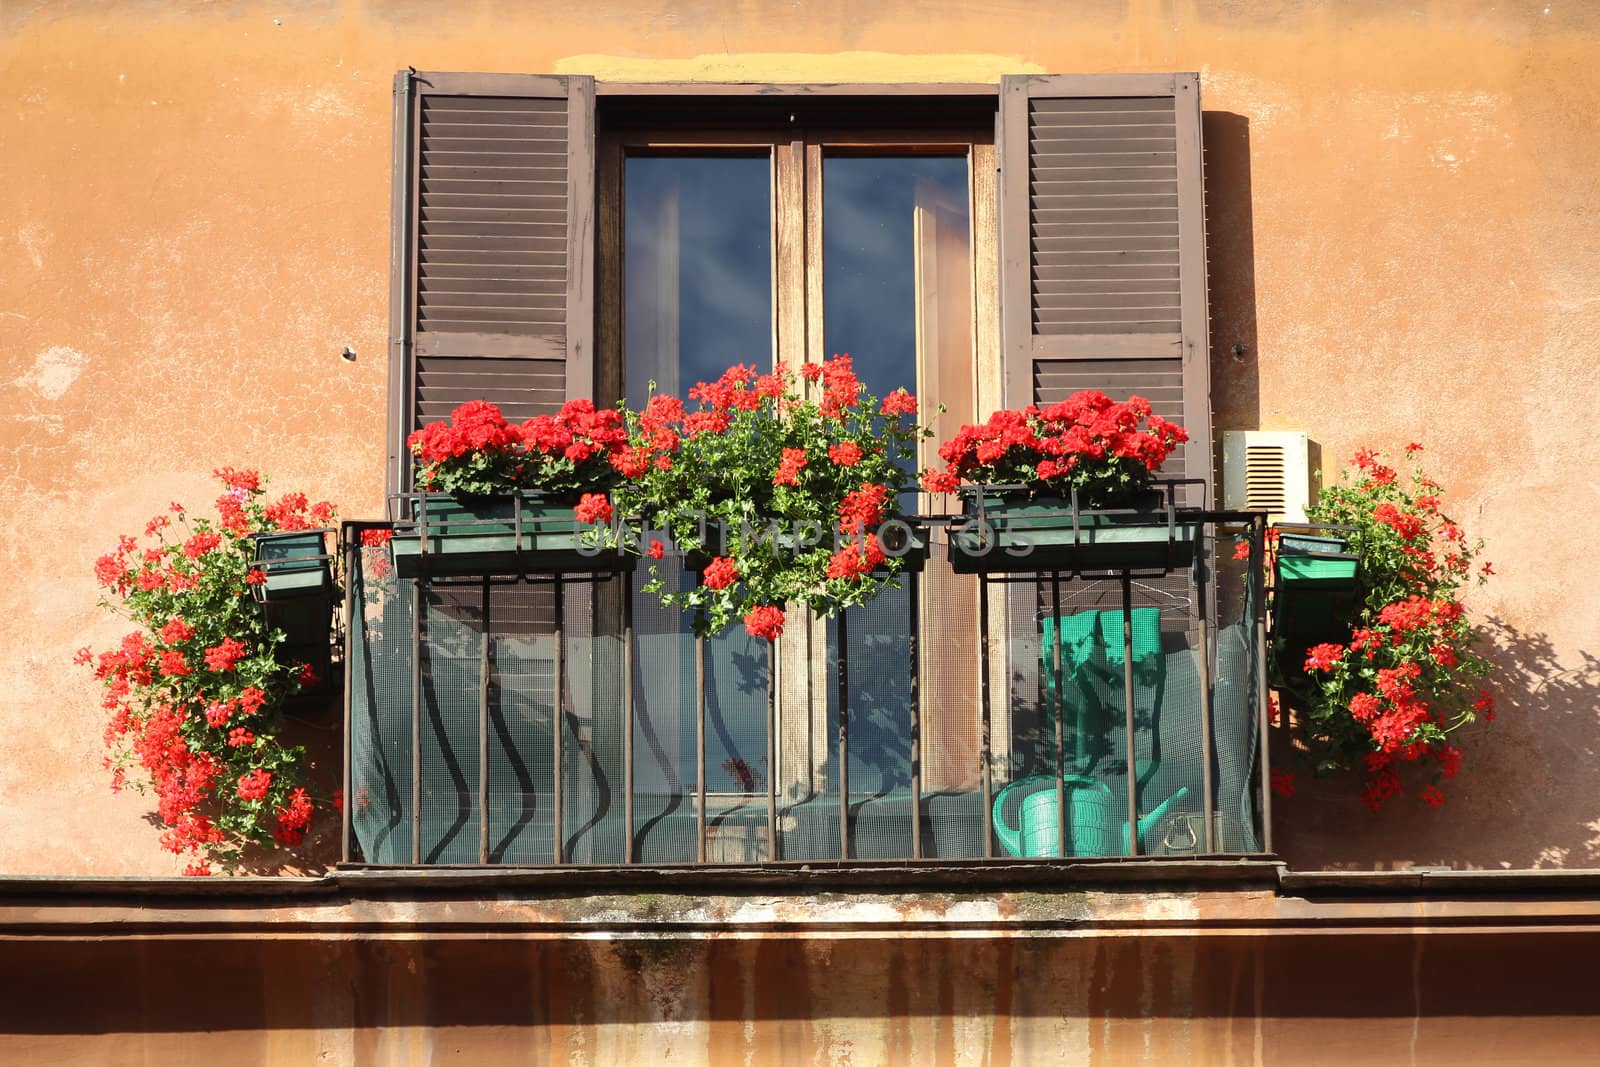 Rome, Italy. Beautiful window decorated with red flowers.